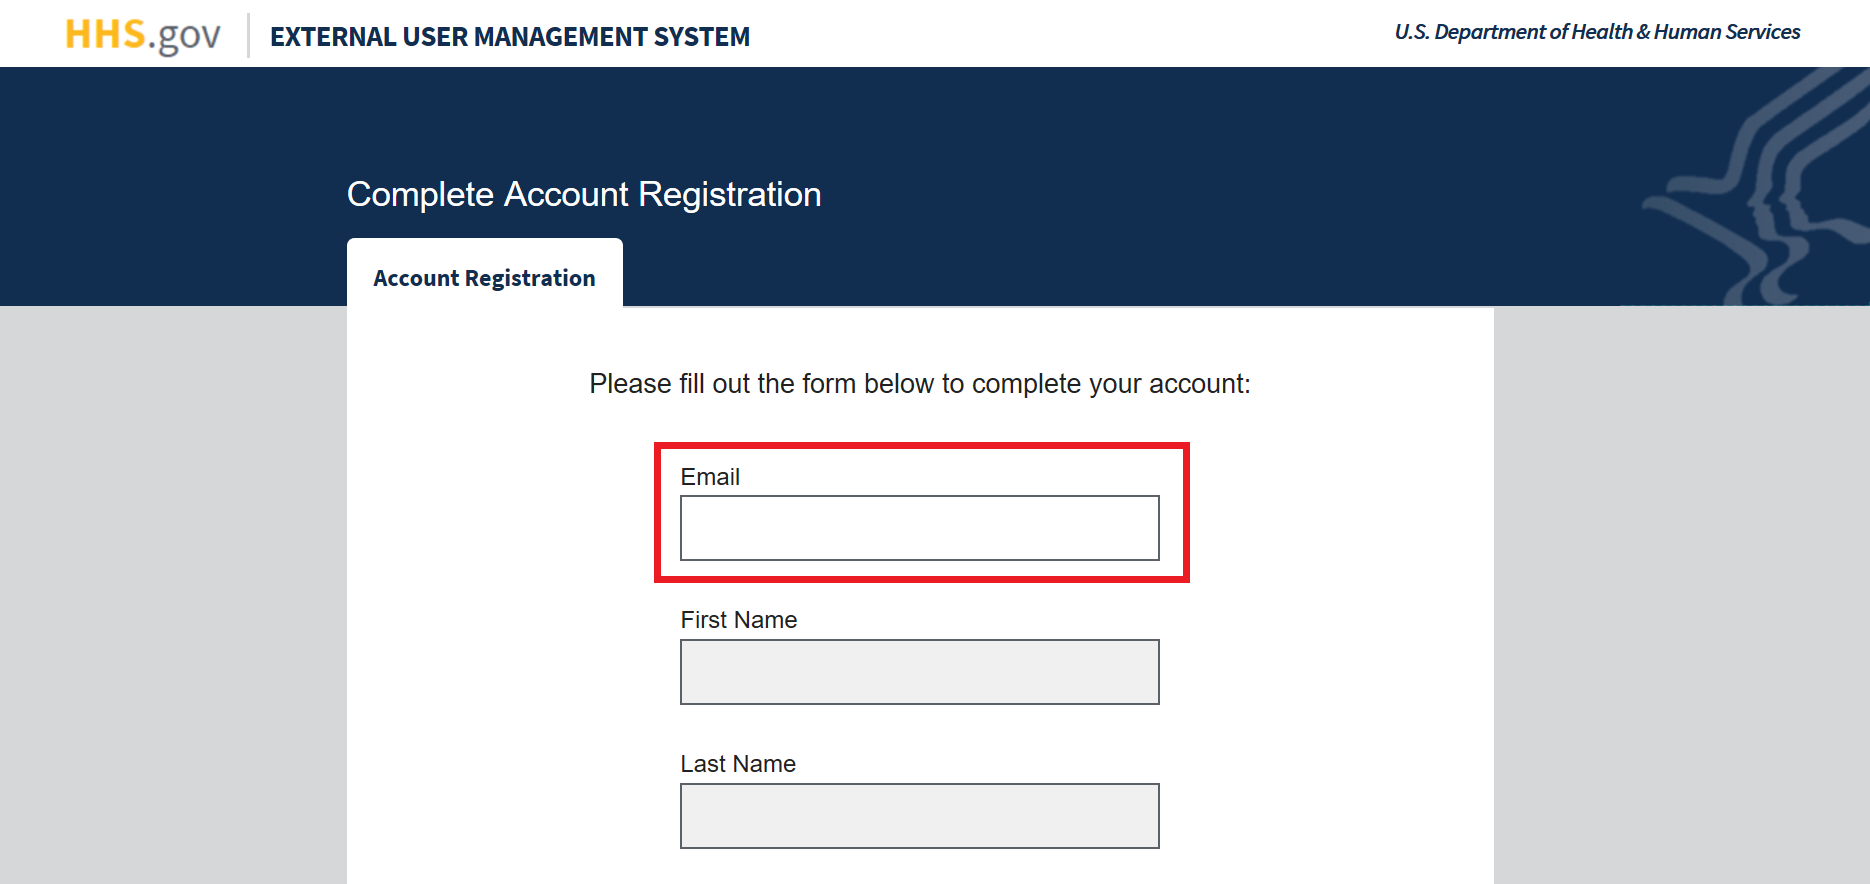 Complete Account Registration page with the 'Email' entry field highlighted